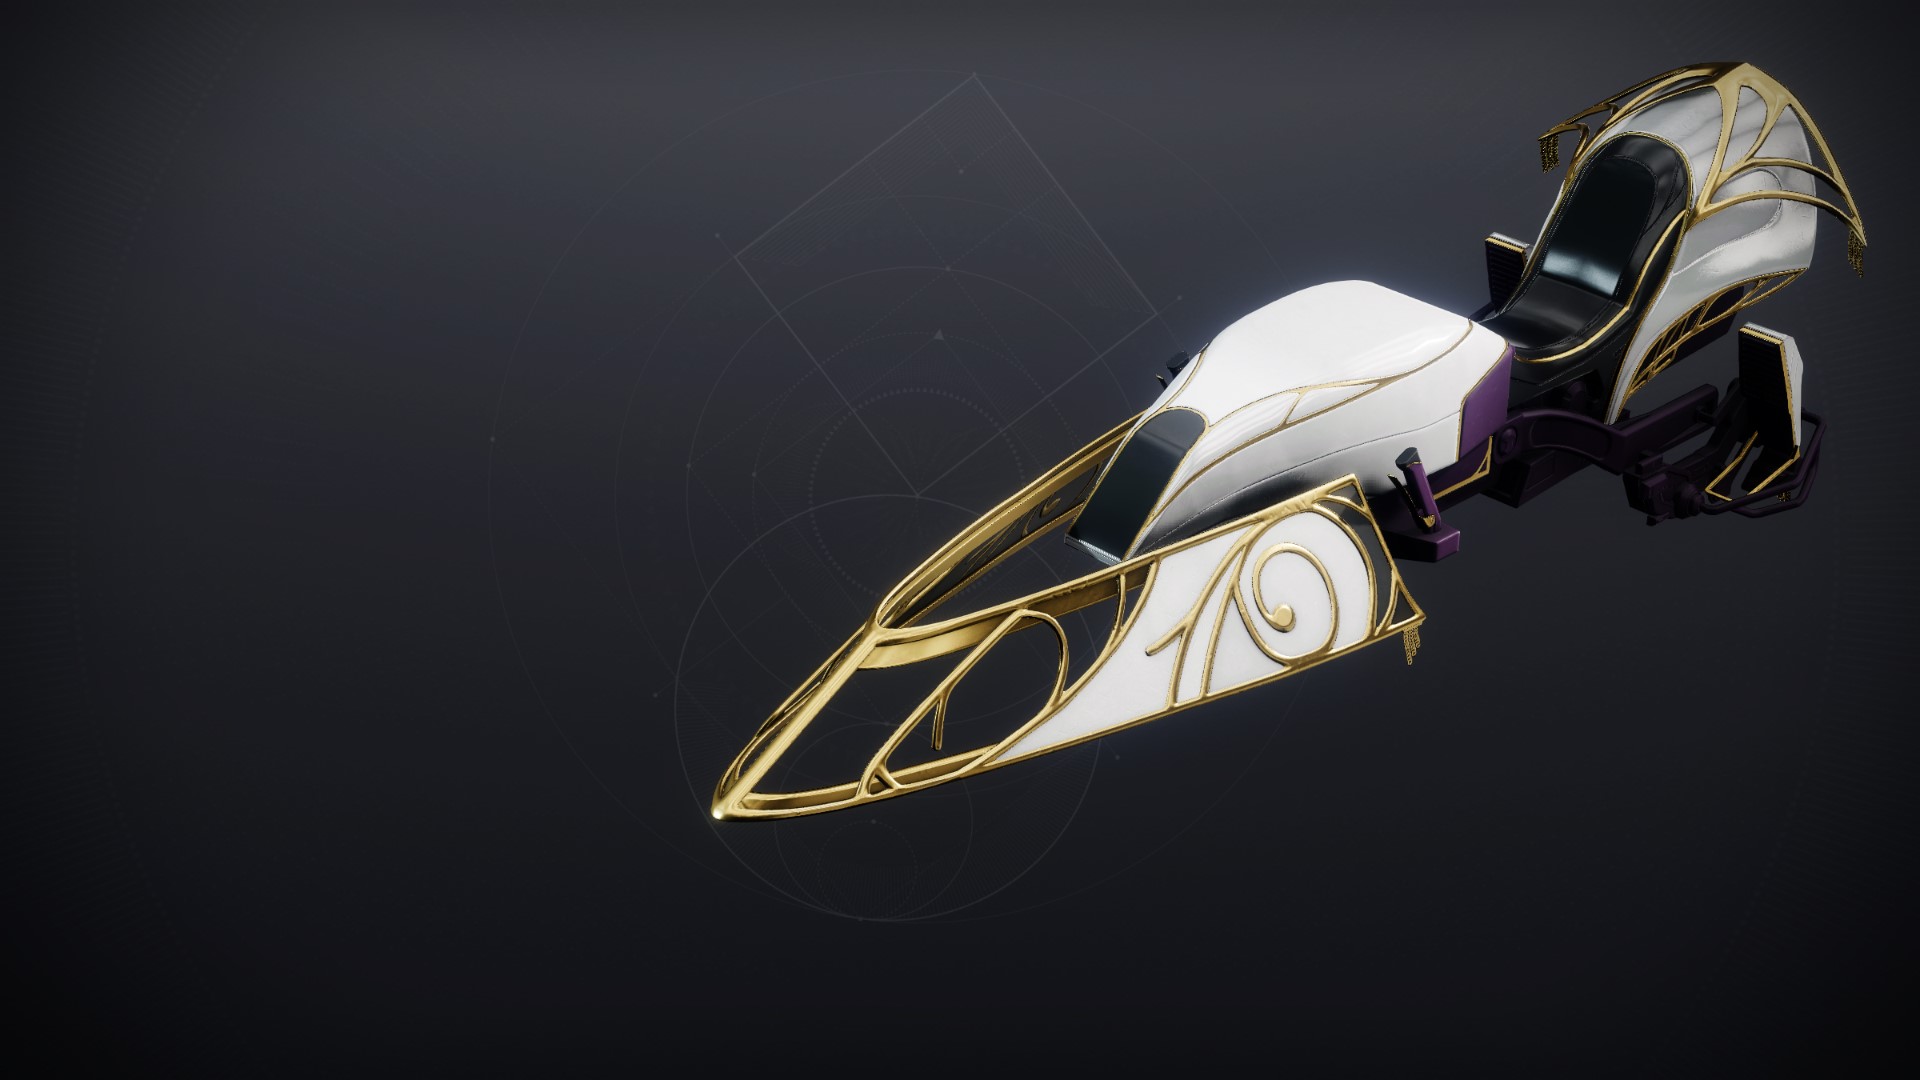 An in-game render of the Aurum Pace.